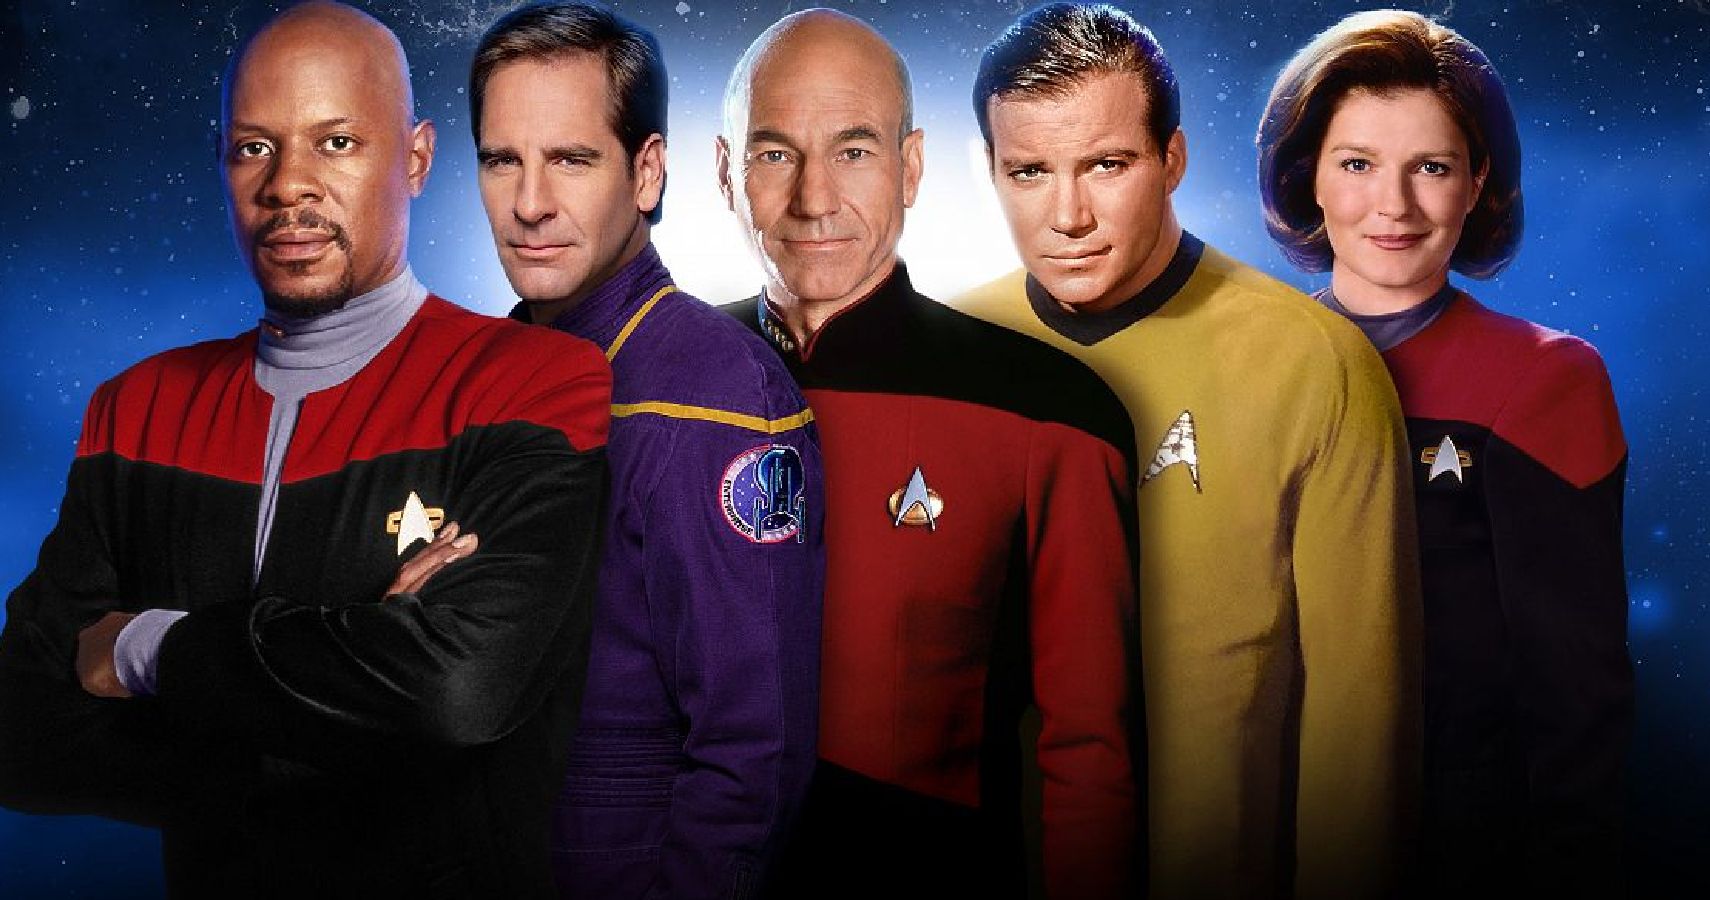 Star Trek The 15 Best Captains In The Franchise (And The 15 Worst)